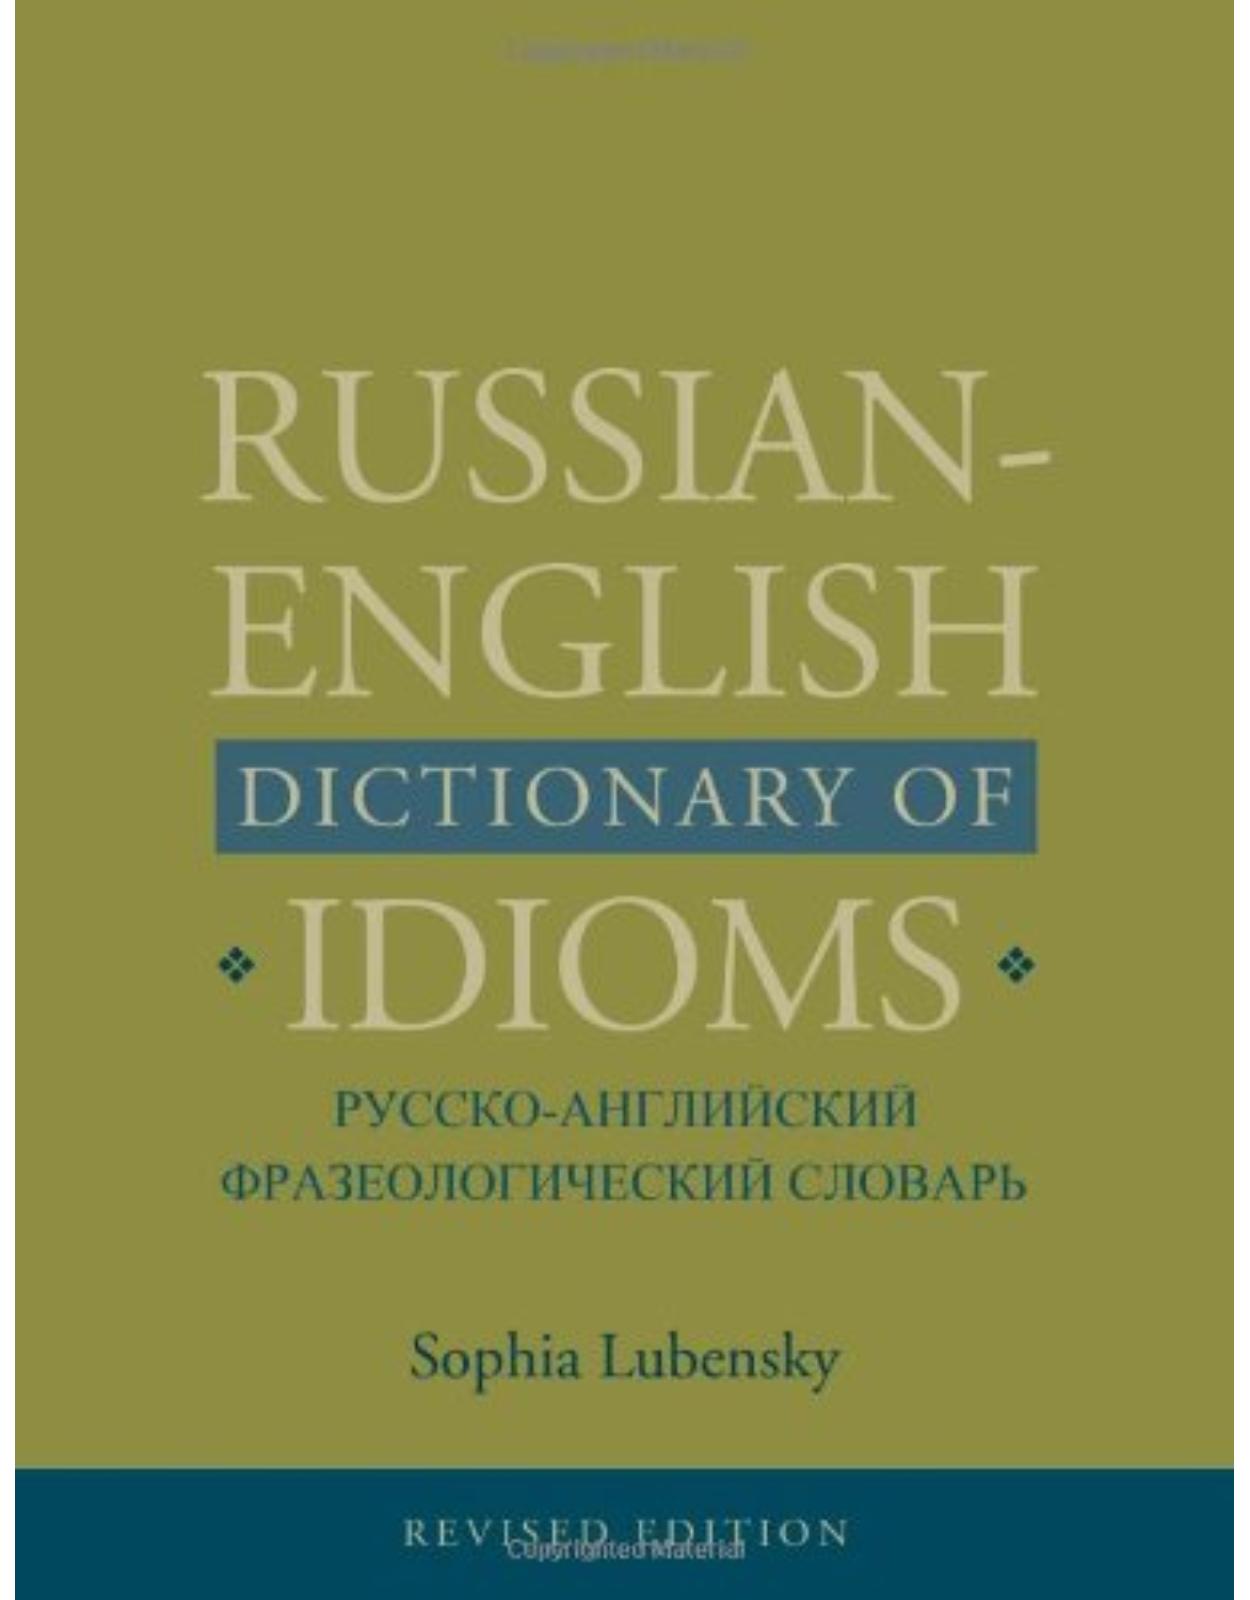 Russian-English Dictionary of Idioms.